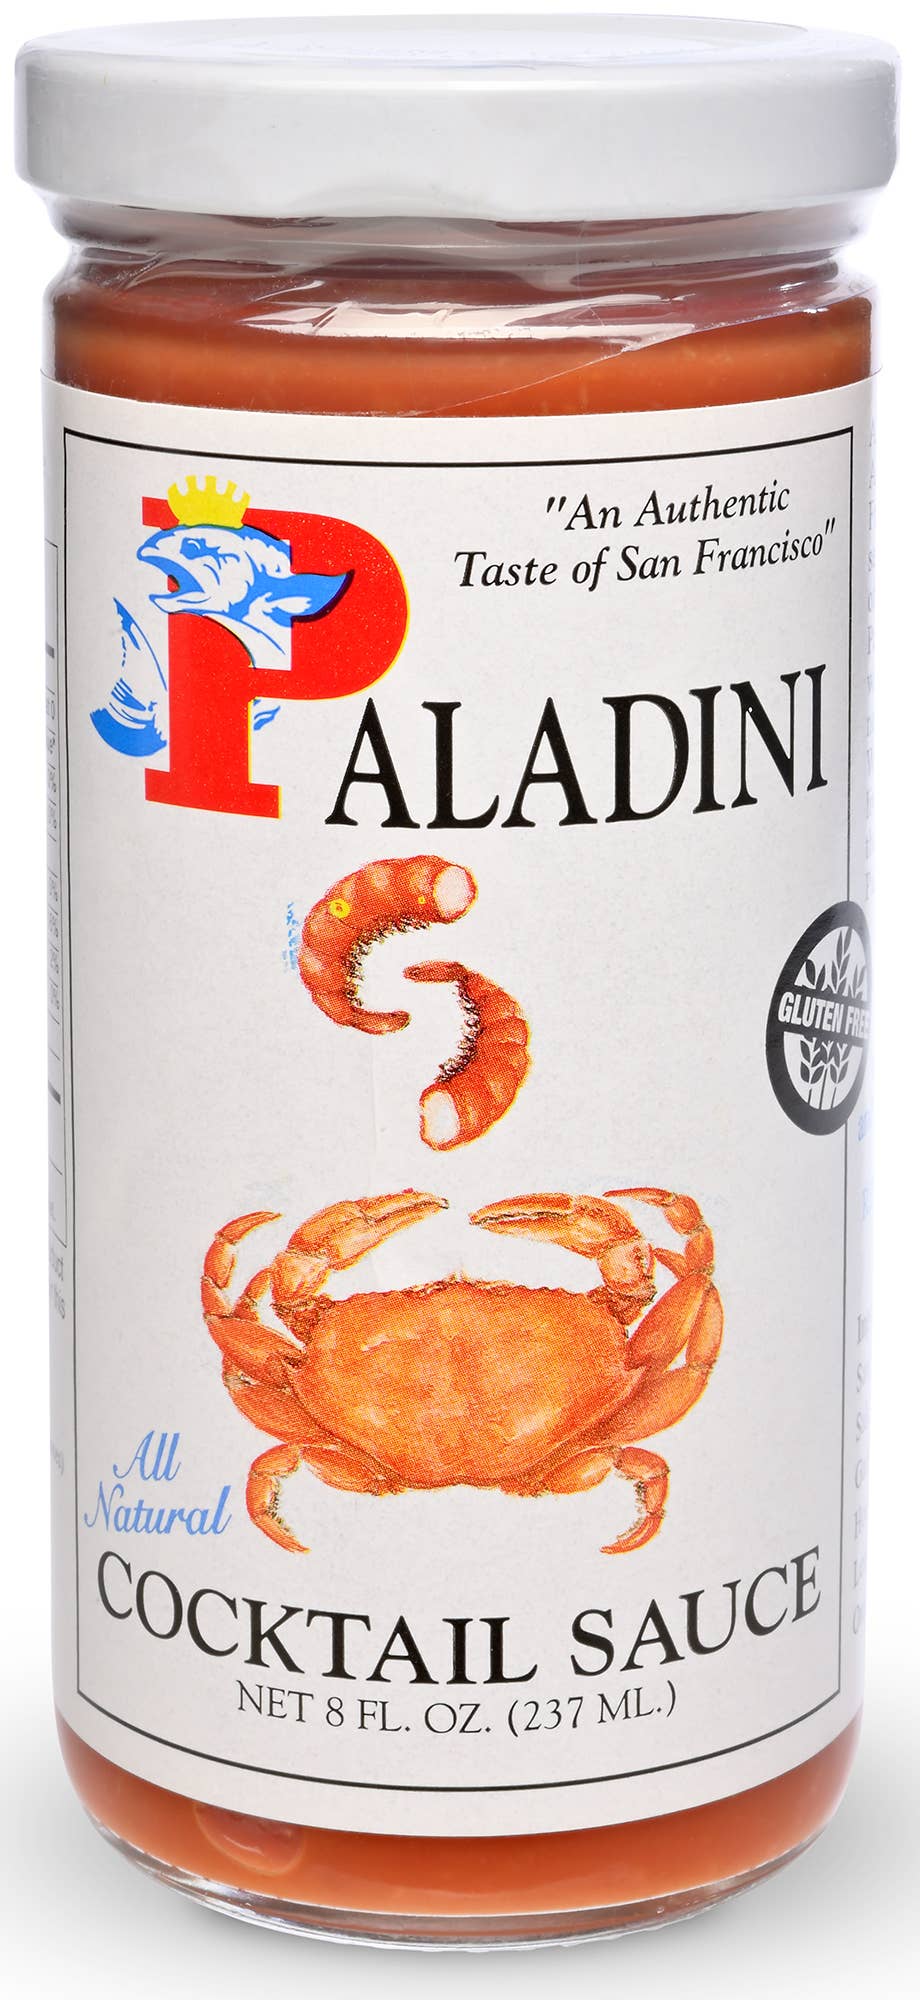 Golden West Specialty Foods - Paladini All-Natural Cocktail Sauce - 8 oz.